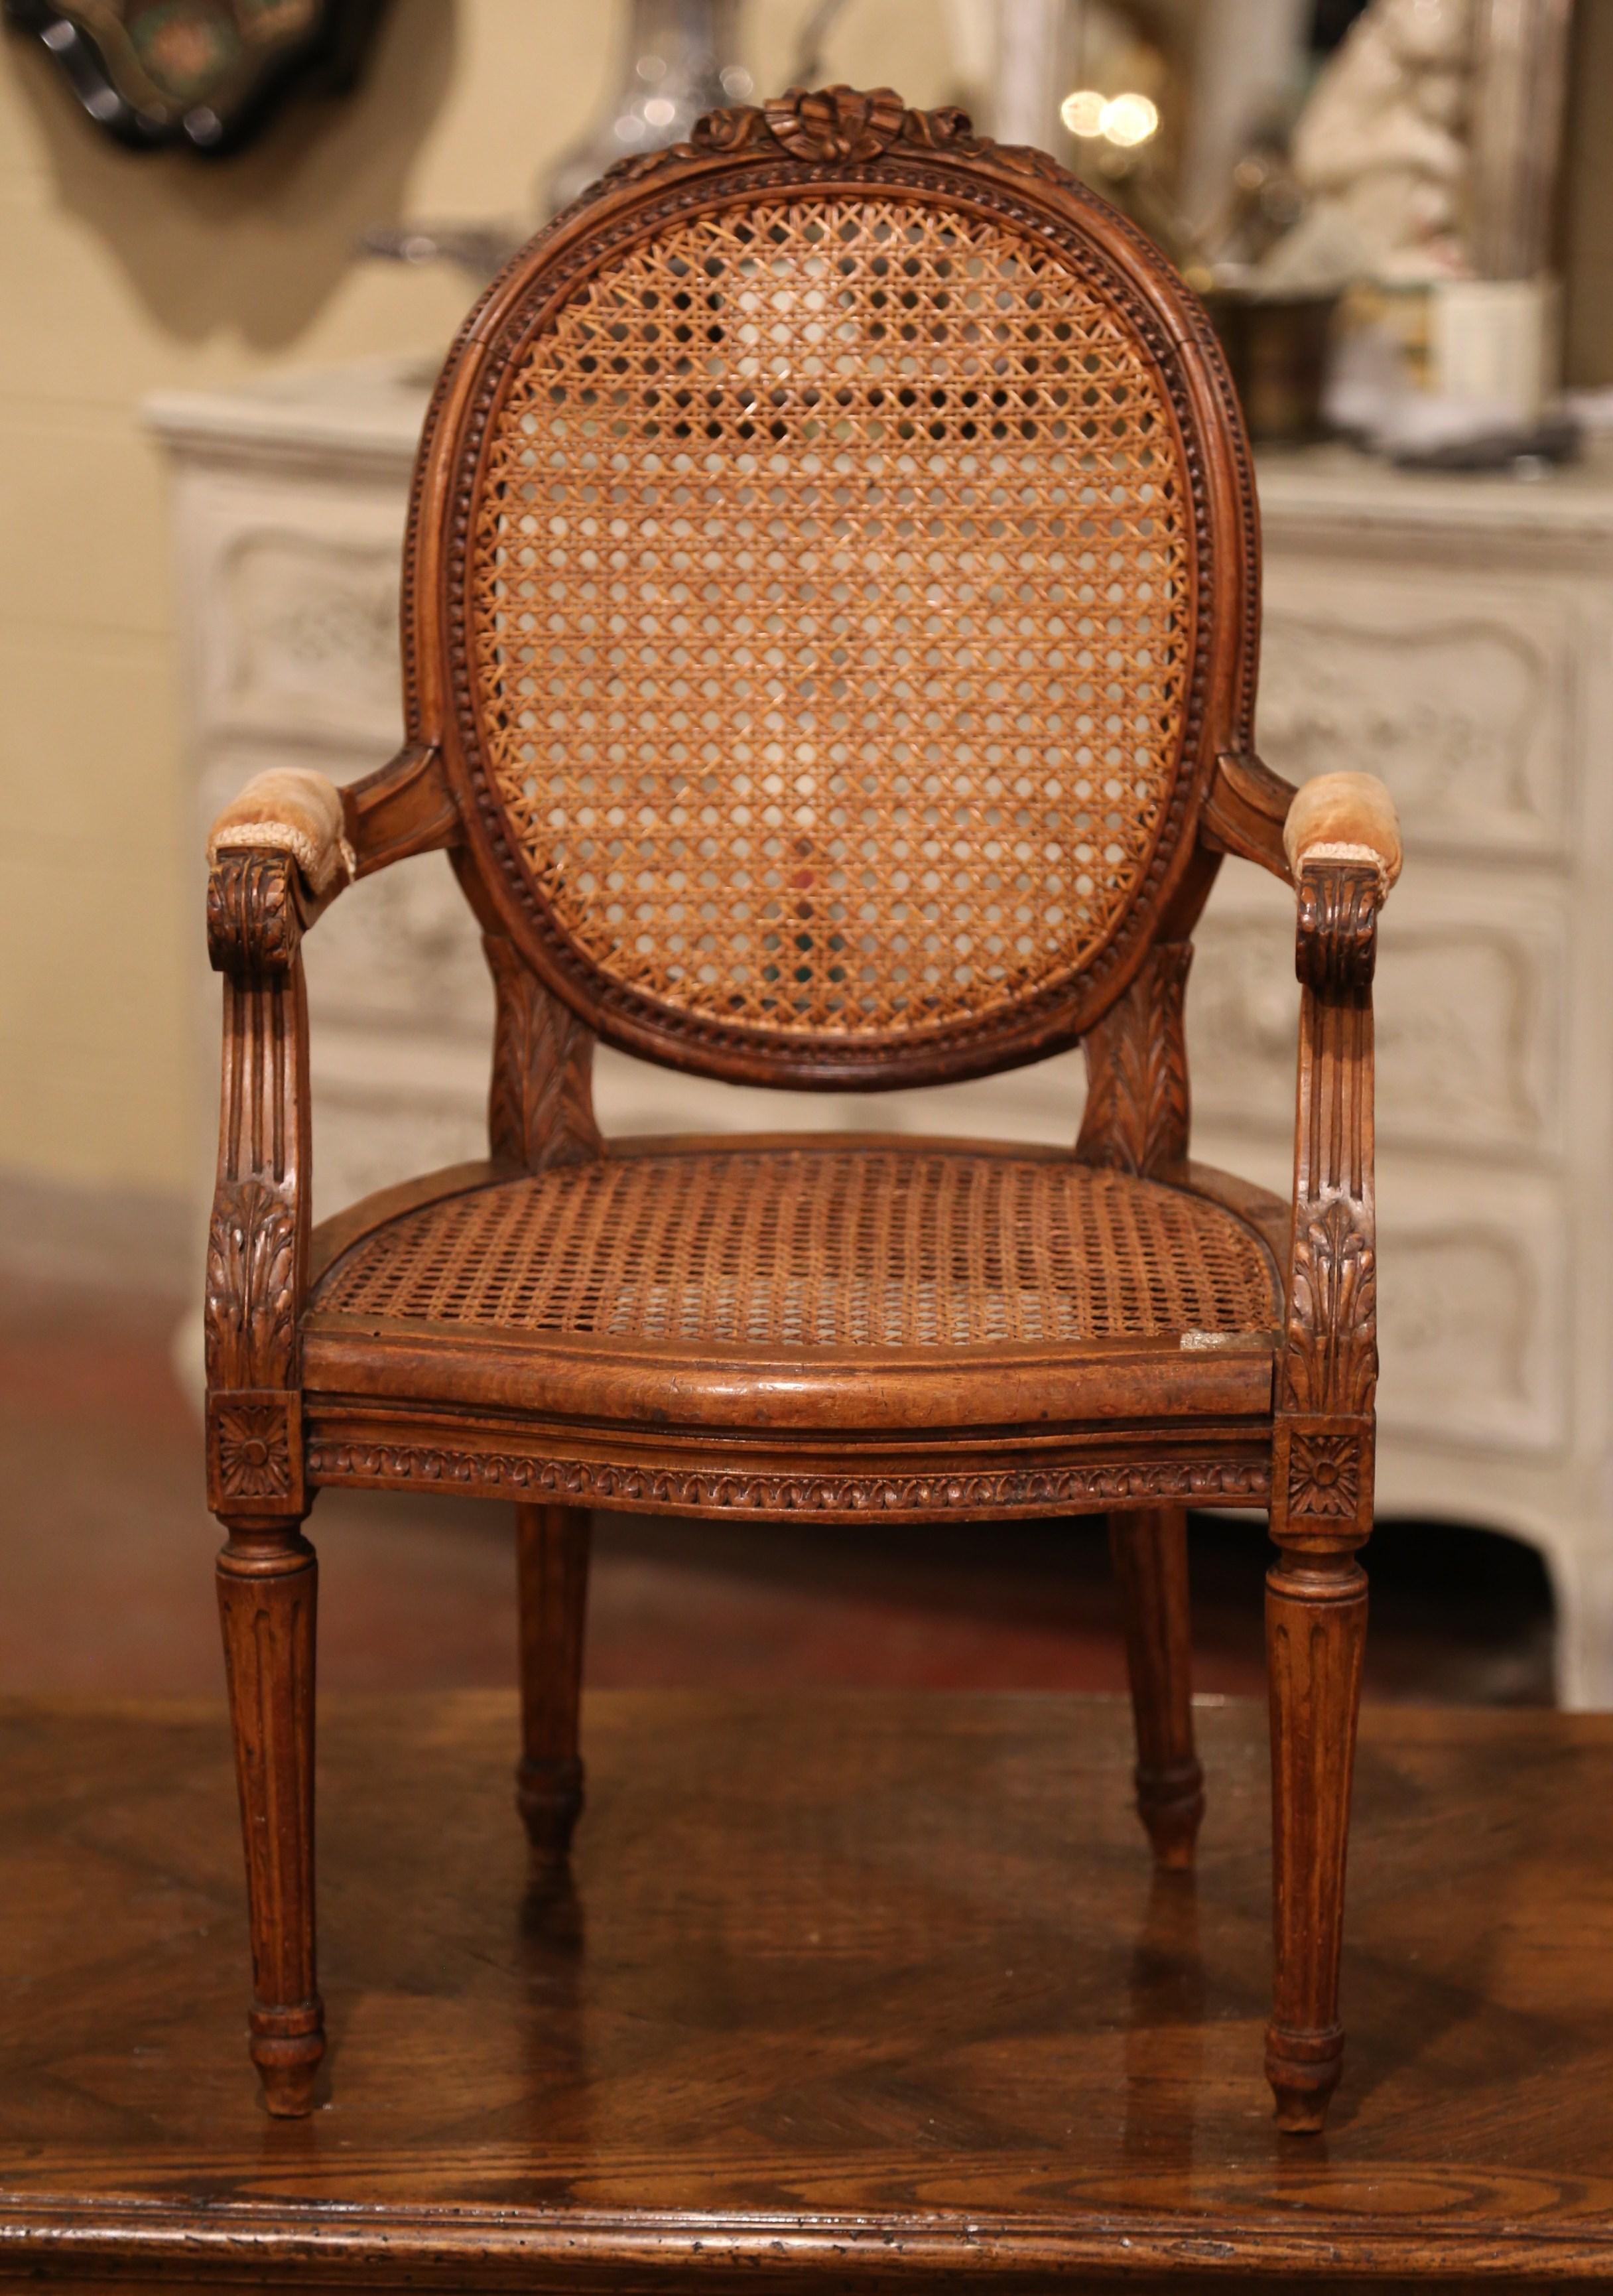 Add charm to a family friendly living room or nursery with this elegant kids armchair. Crafted in France circa 1860 and heavily carved, the antique chair stands on tapered and fluted legs decorated with floral medallions at the shoulder; the